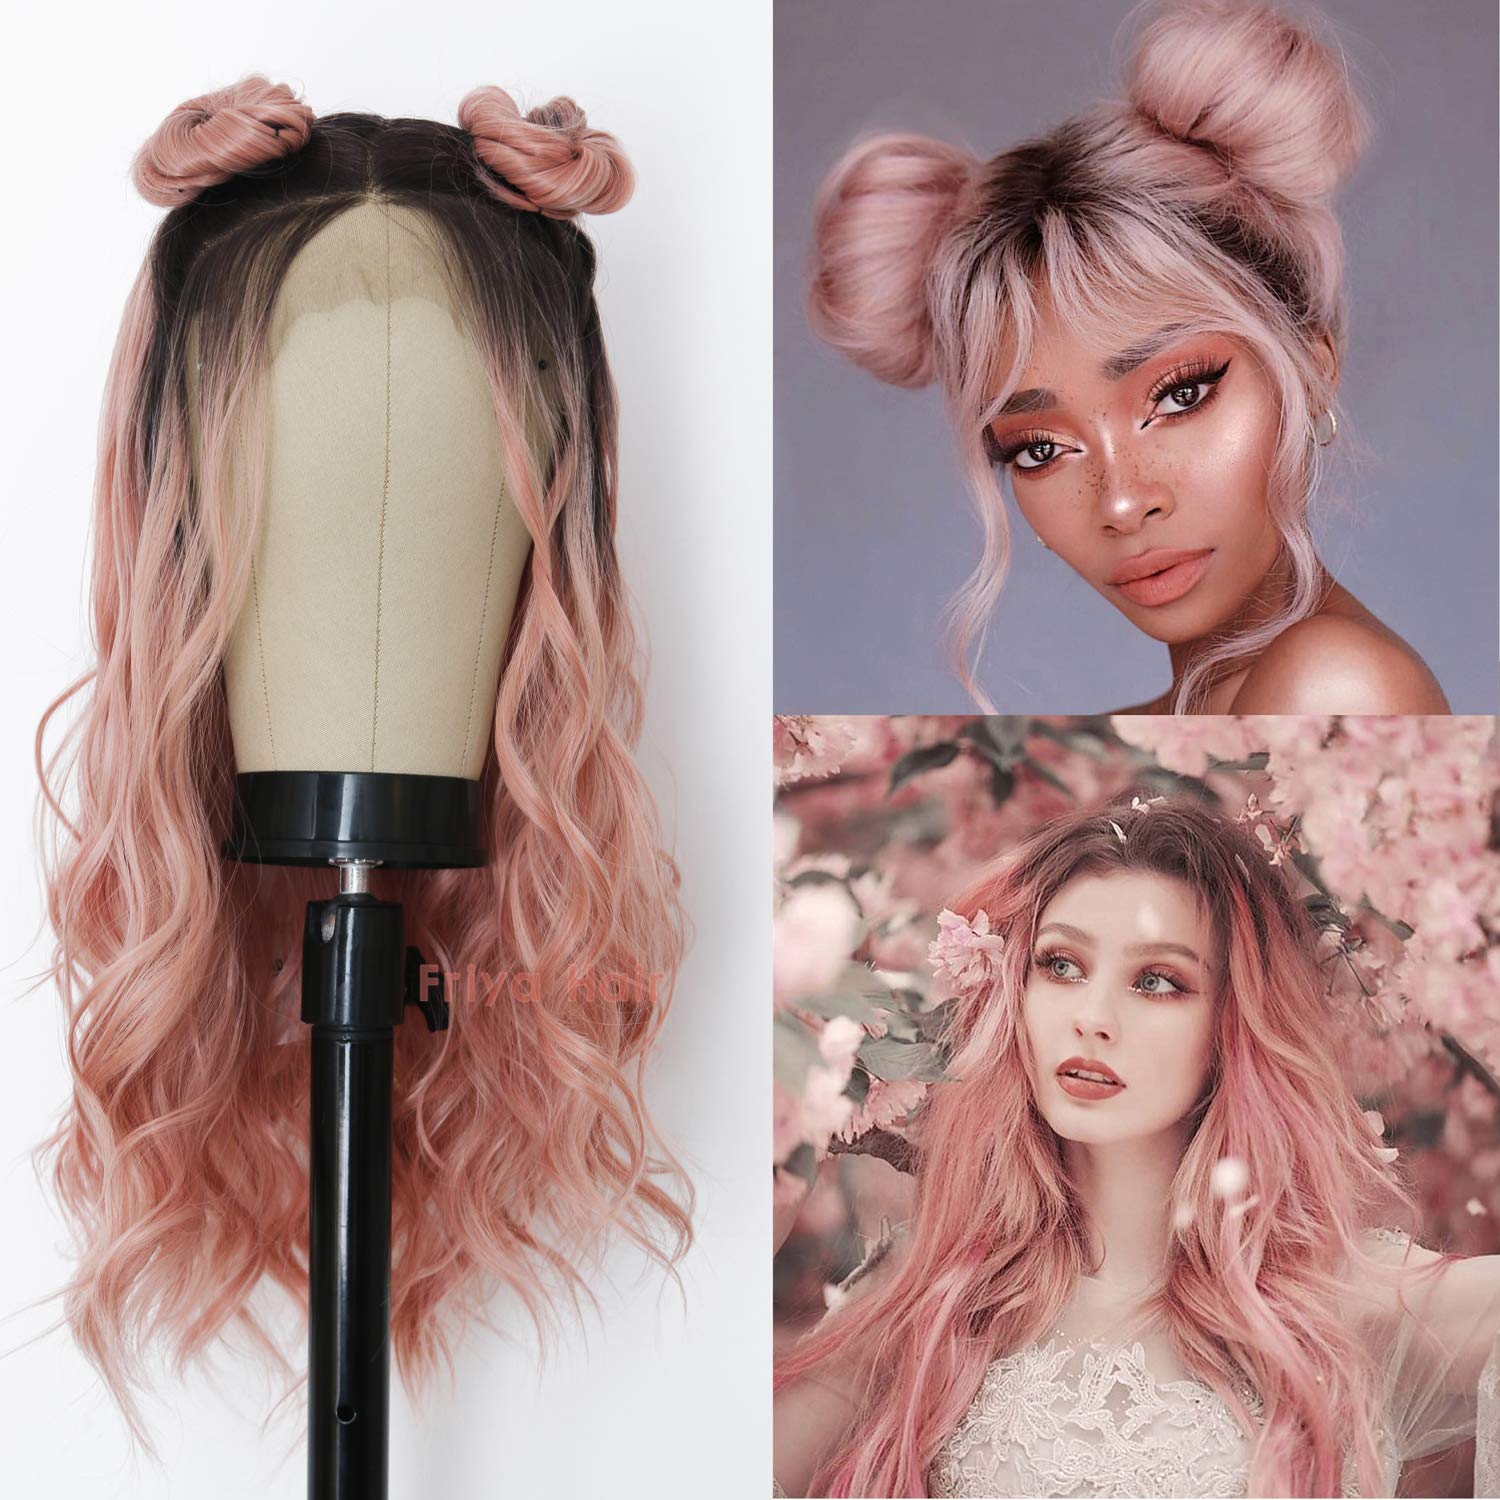 Price:$43.88     Friya Hair Dark Rooted Ombre Pink 2 Tone color Lace Front Wigs Long Deep Curly Loose Wave Wig Synthetic Heat Resistant Fiber Hair Glueless lace Wig With Baby Hair Natural Hairline for Women 24 Inch   Beauty